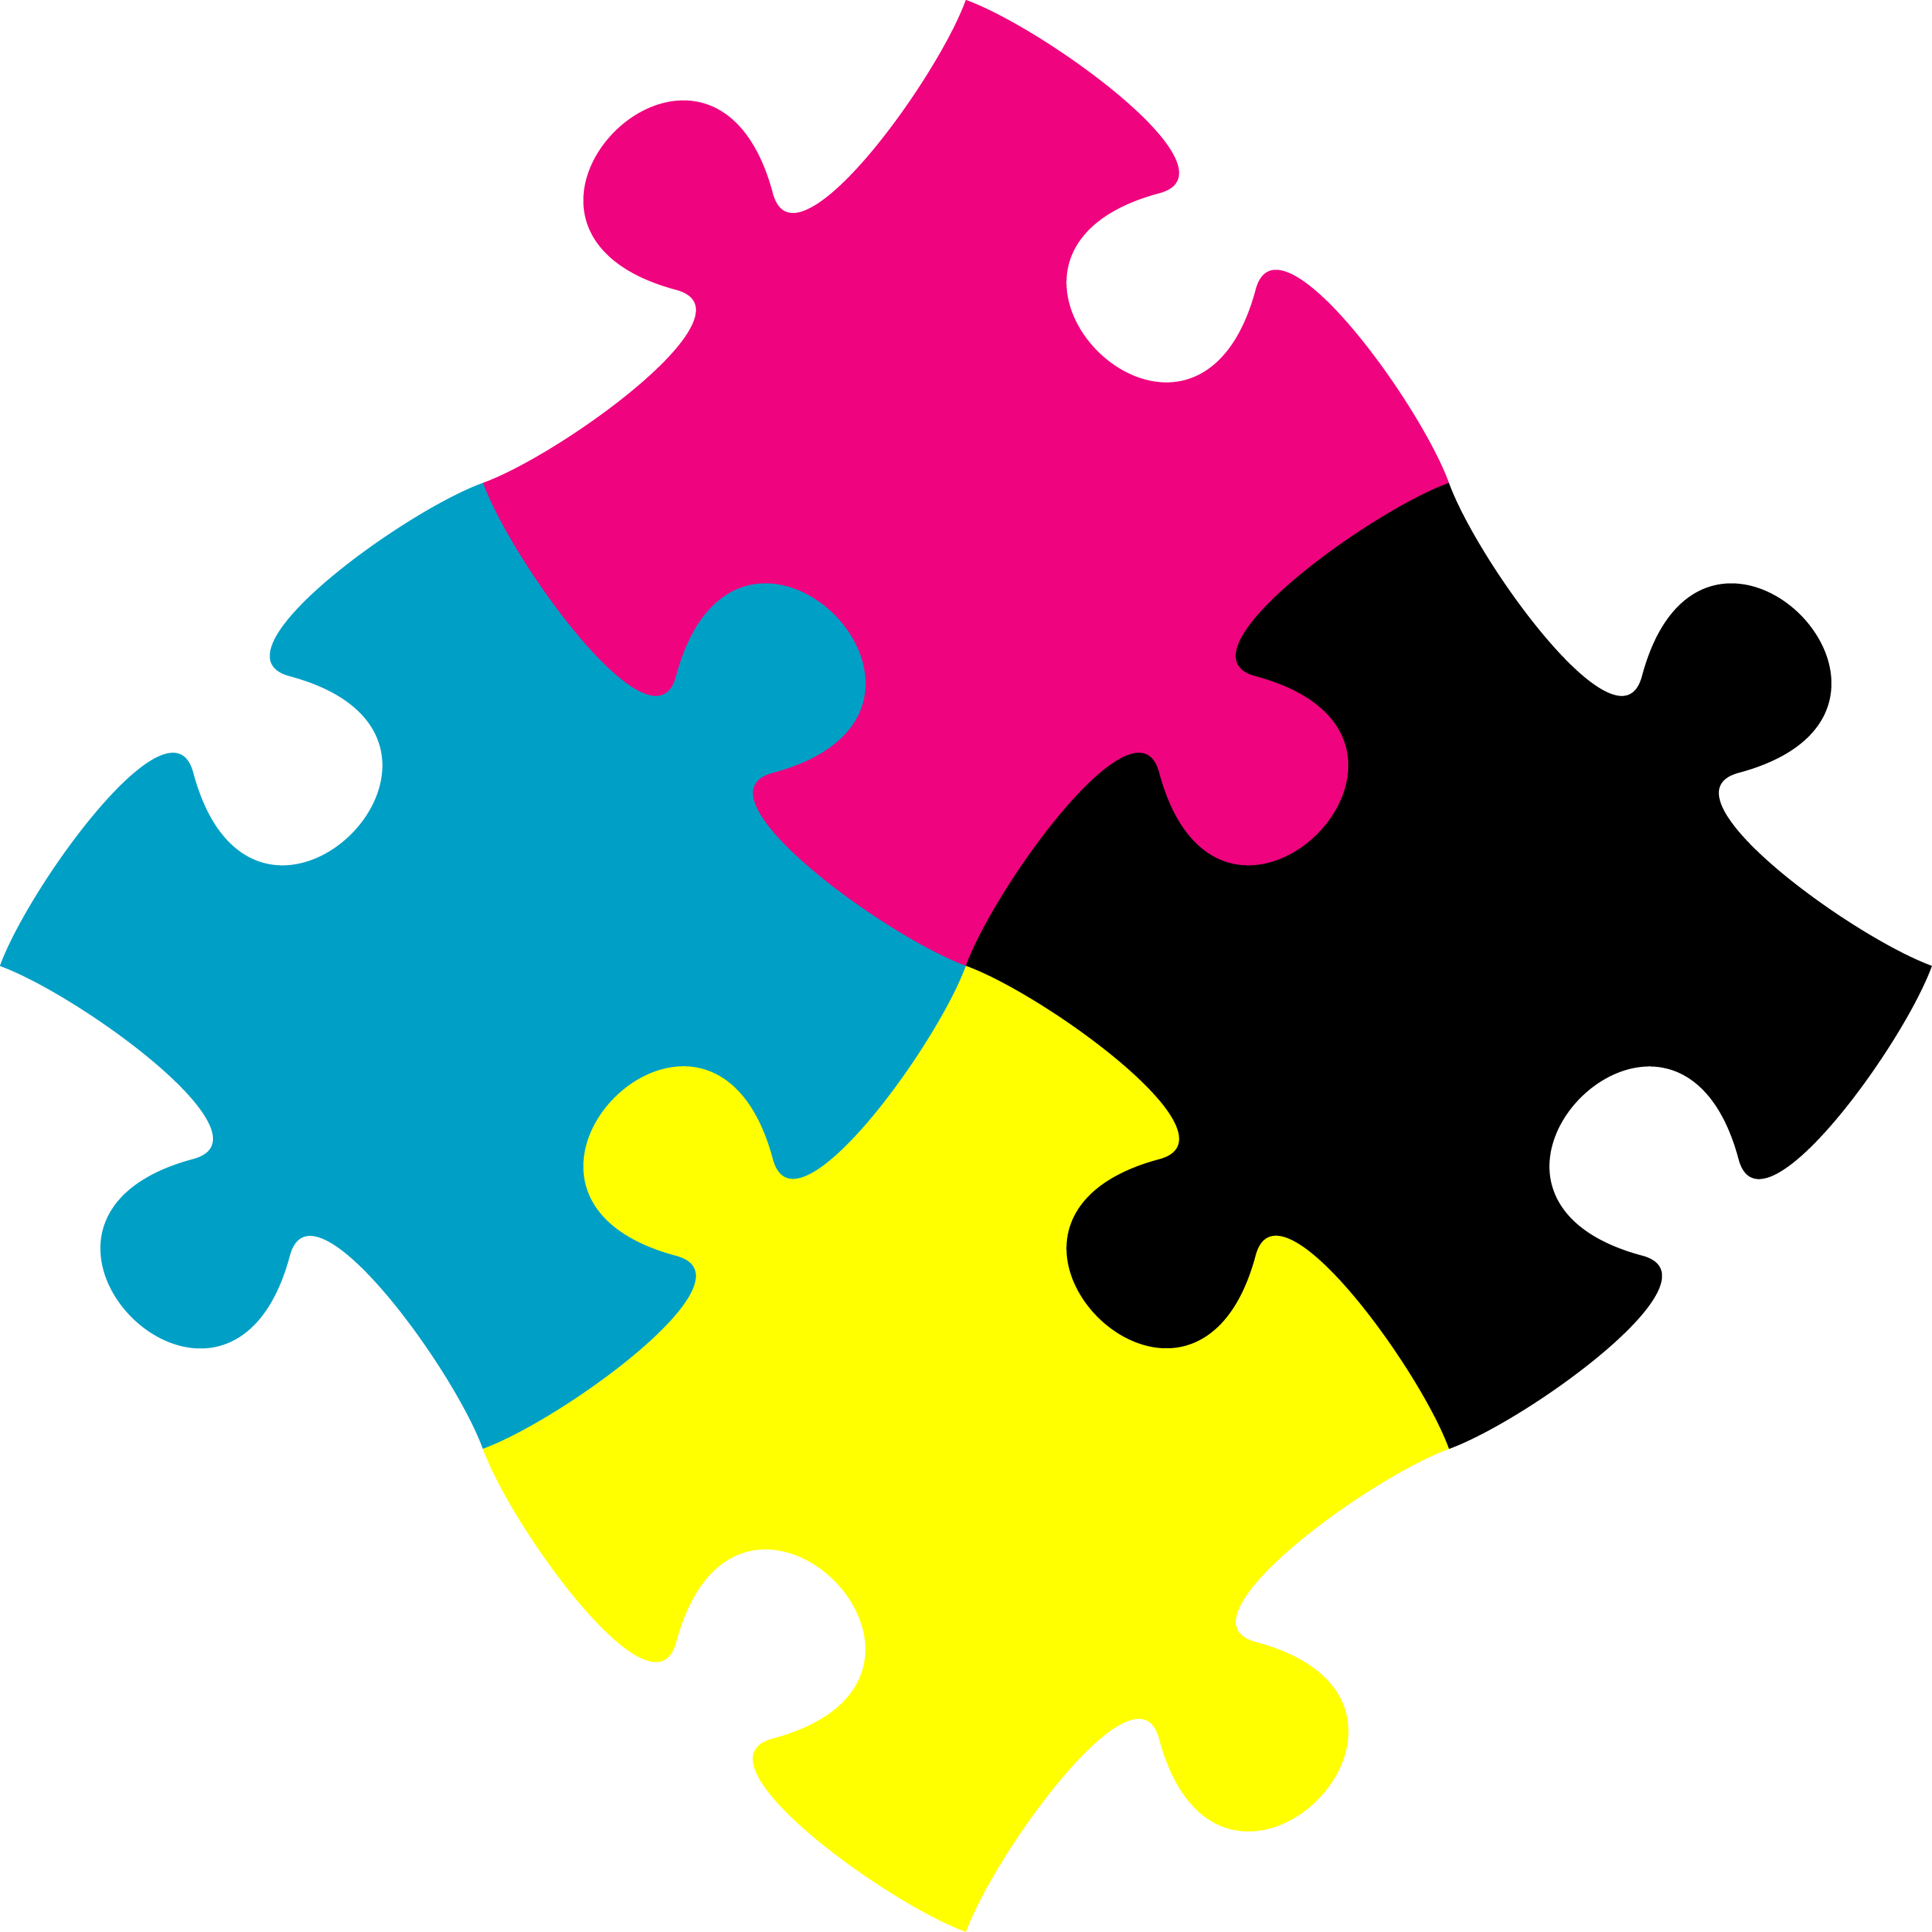 Free vector graphic: Jigsaw, 